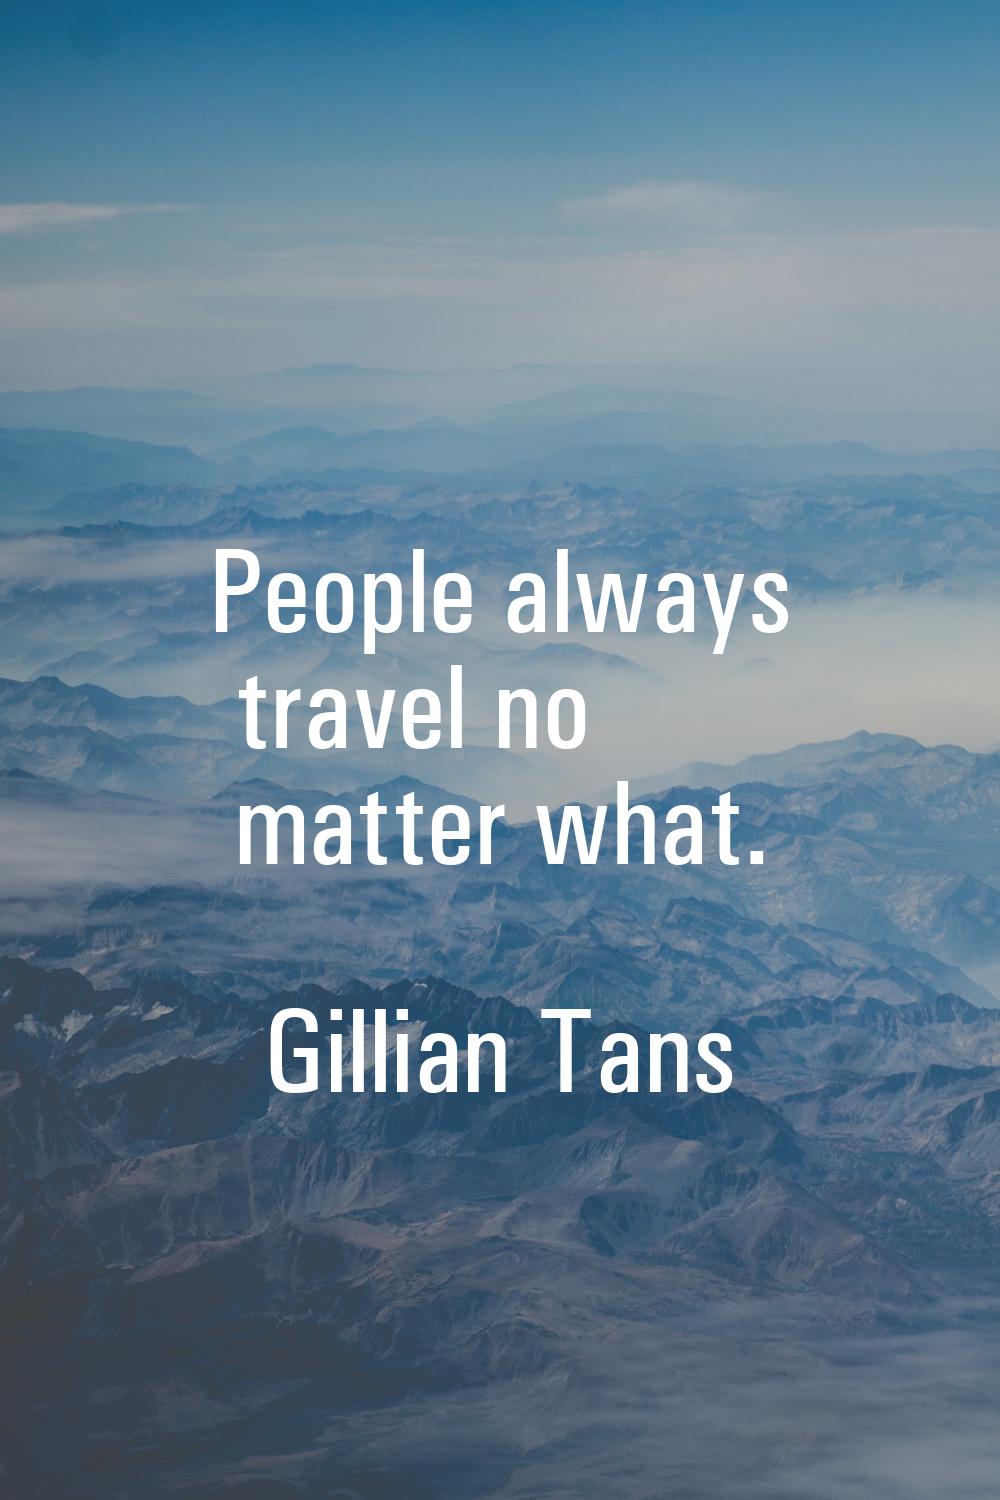 People always travel no matter what.